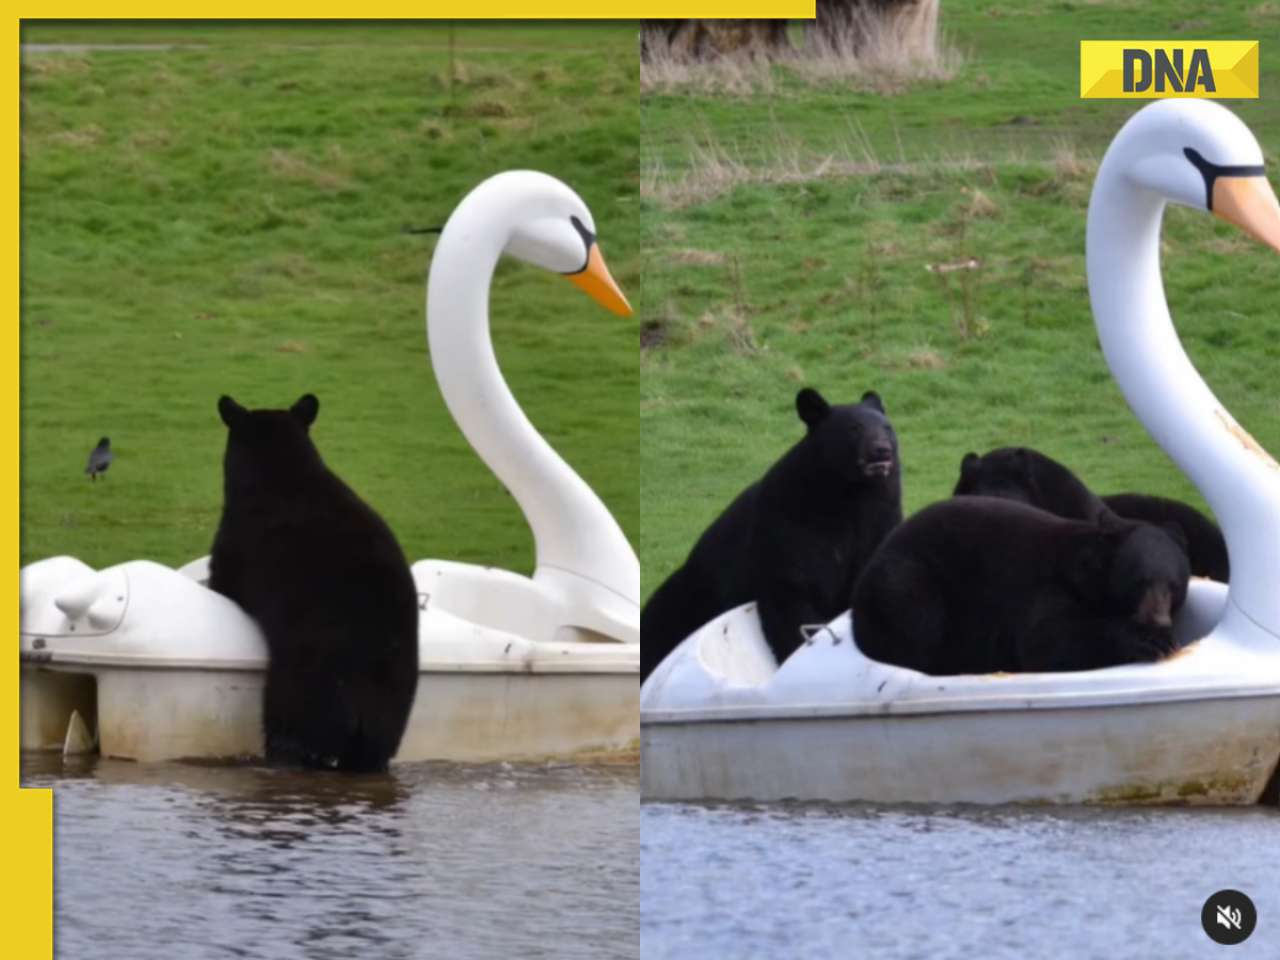 Pause your day and watch these bears enjoying a swanky swan boat ride